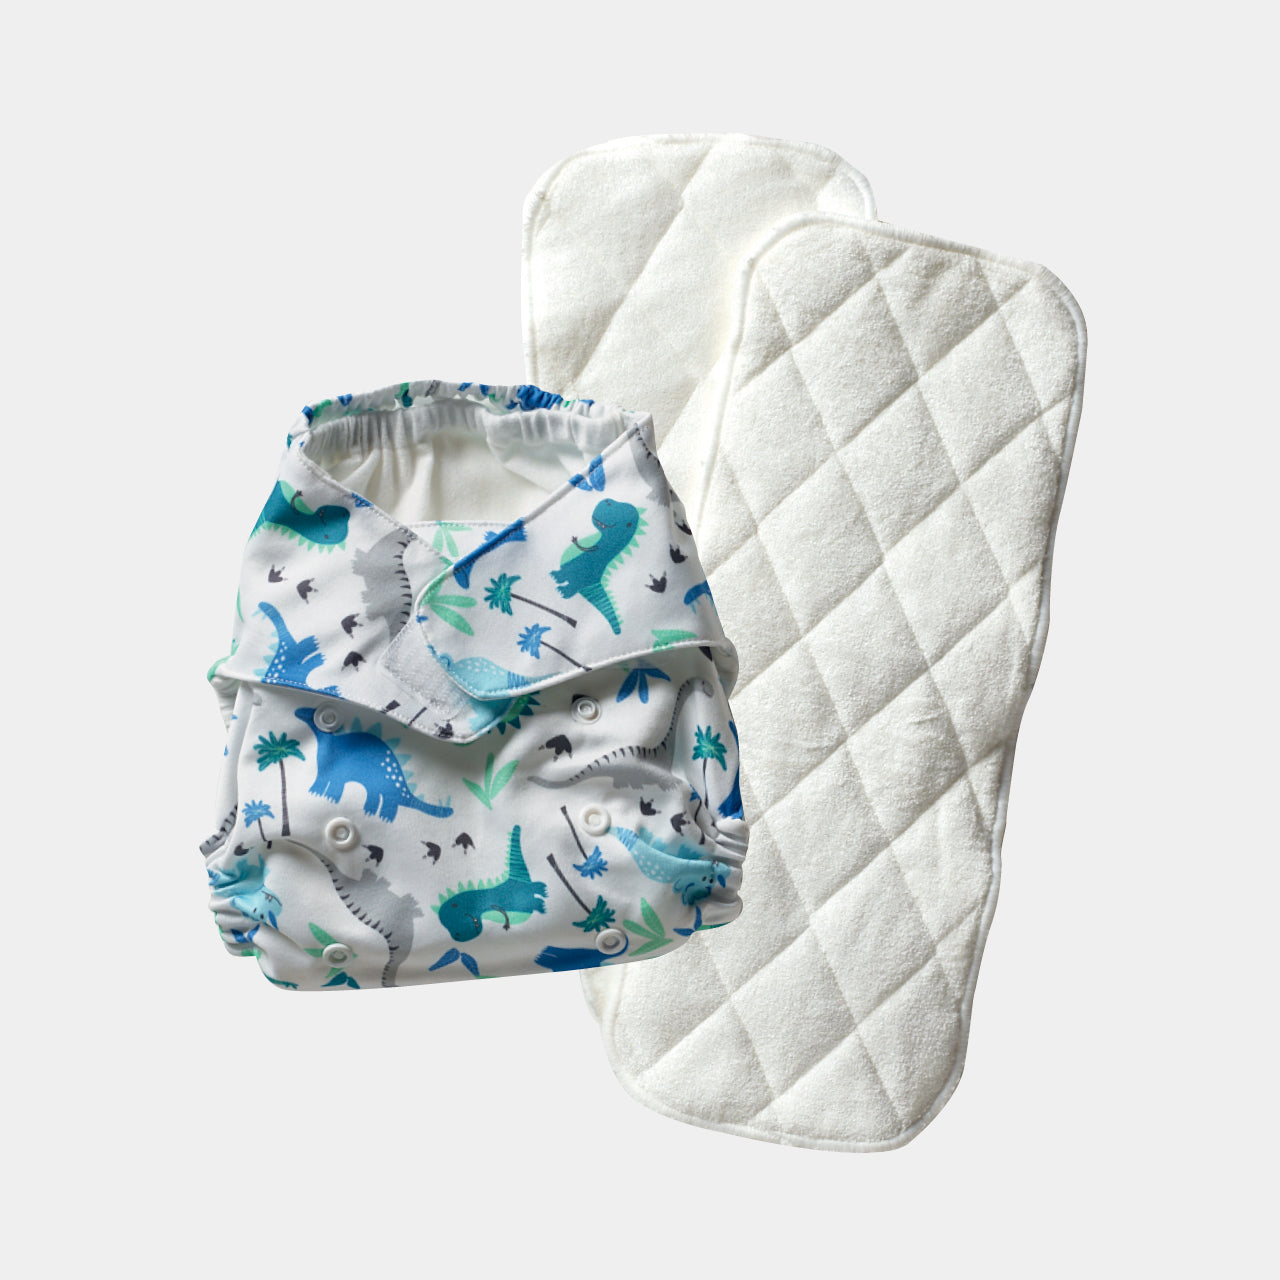 Dinosaur Reusable Nappy and liners on a white background